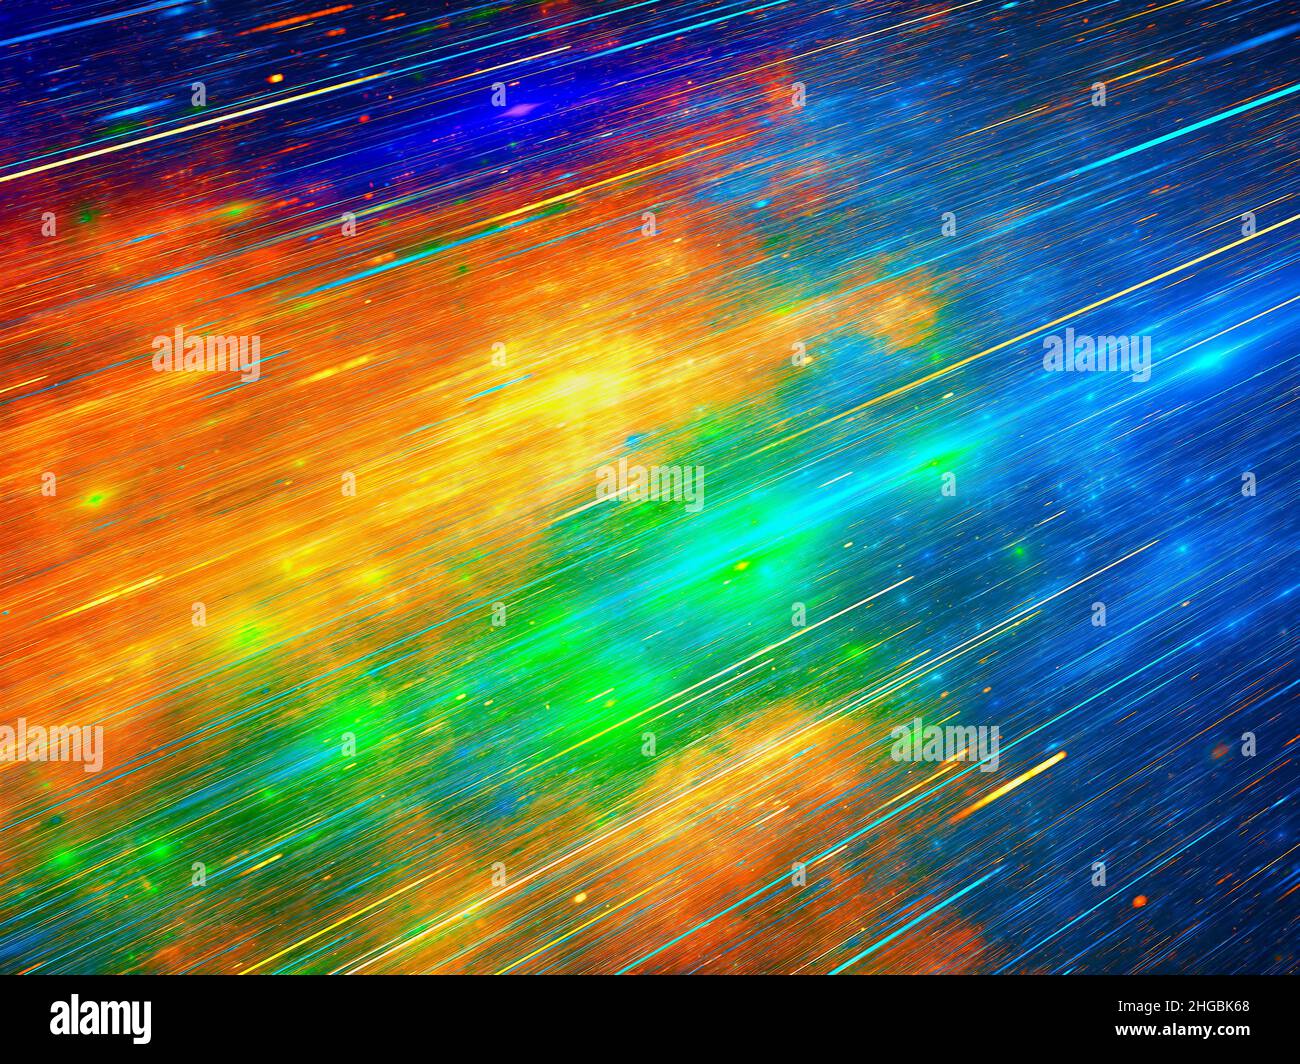 Blurred multicolored background with motion blur effect - abstract illustration Stock Photo